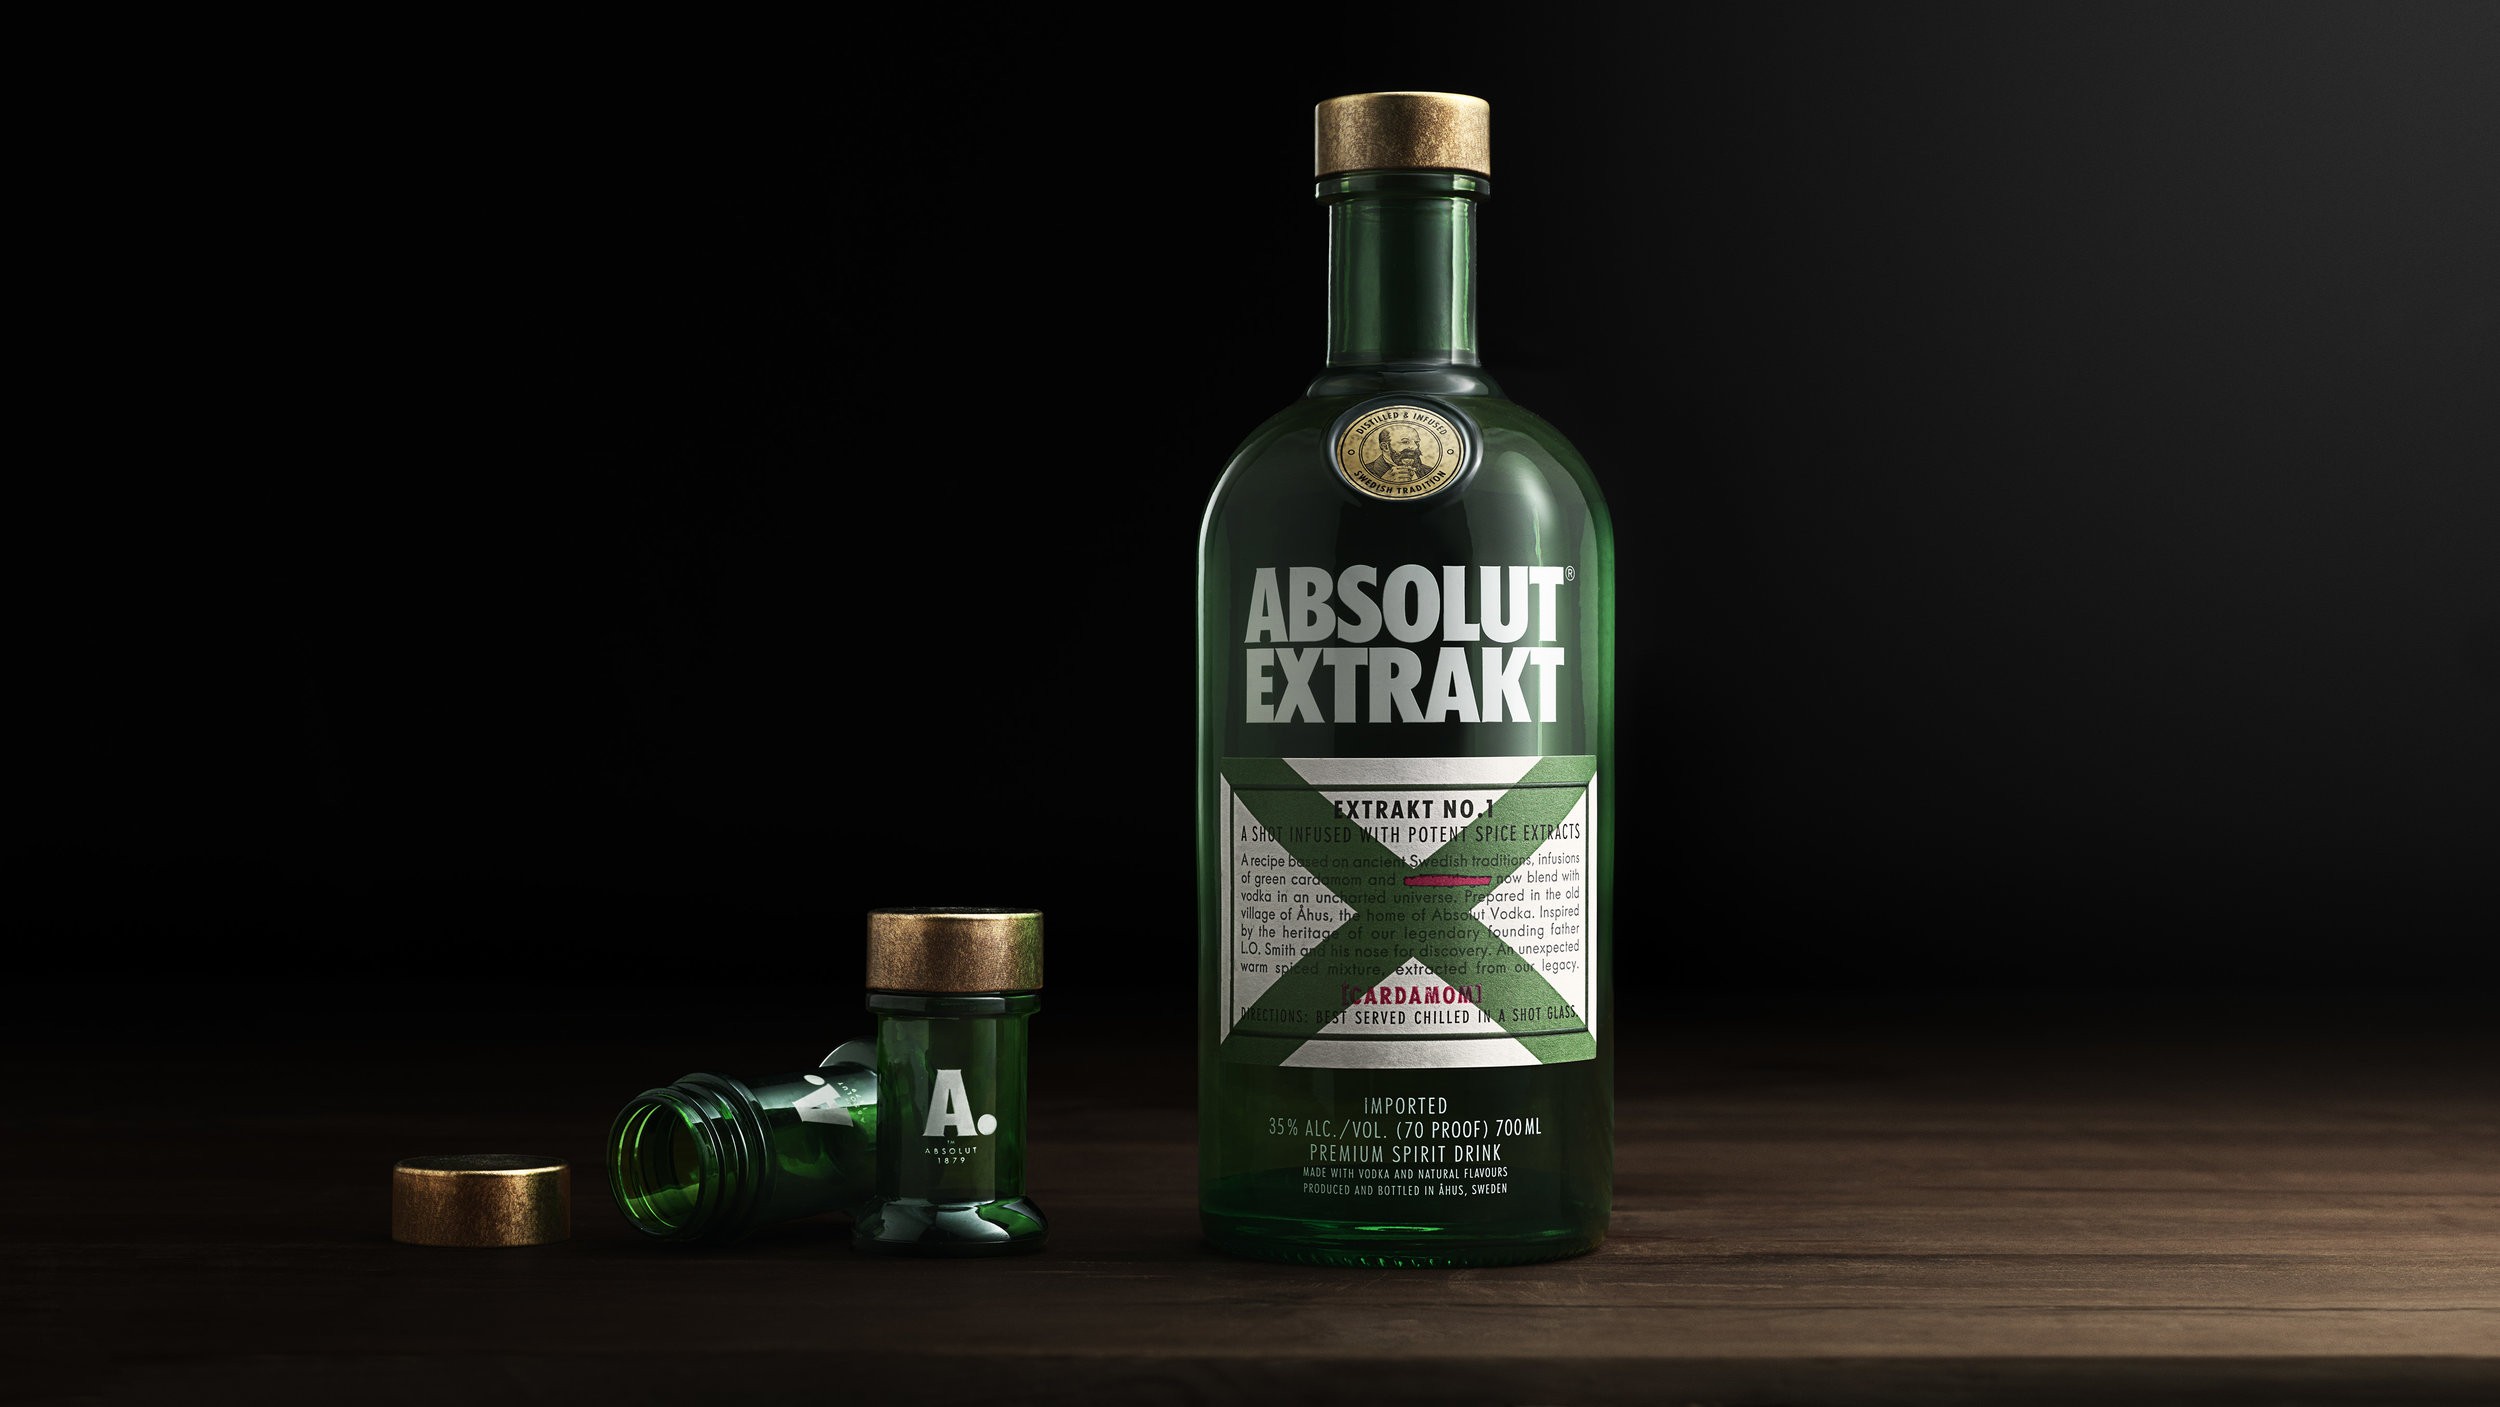 Absolut Extrakt the Presence of High-Energy to Introduce a New Shots Proposition